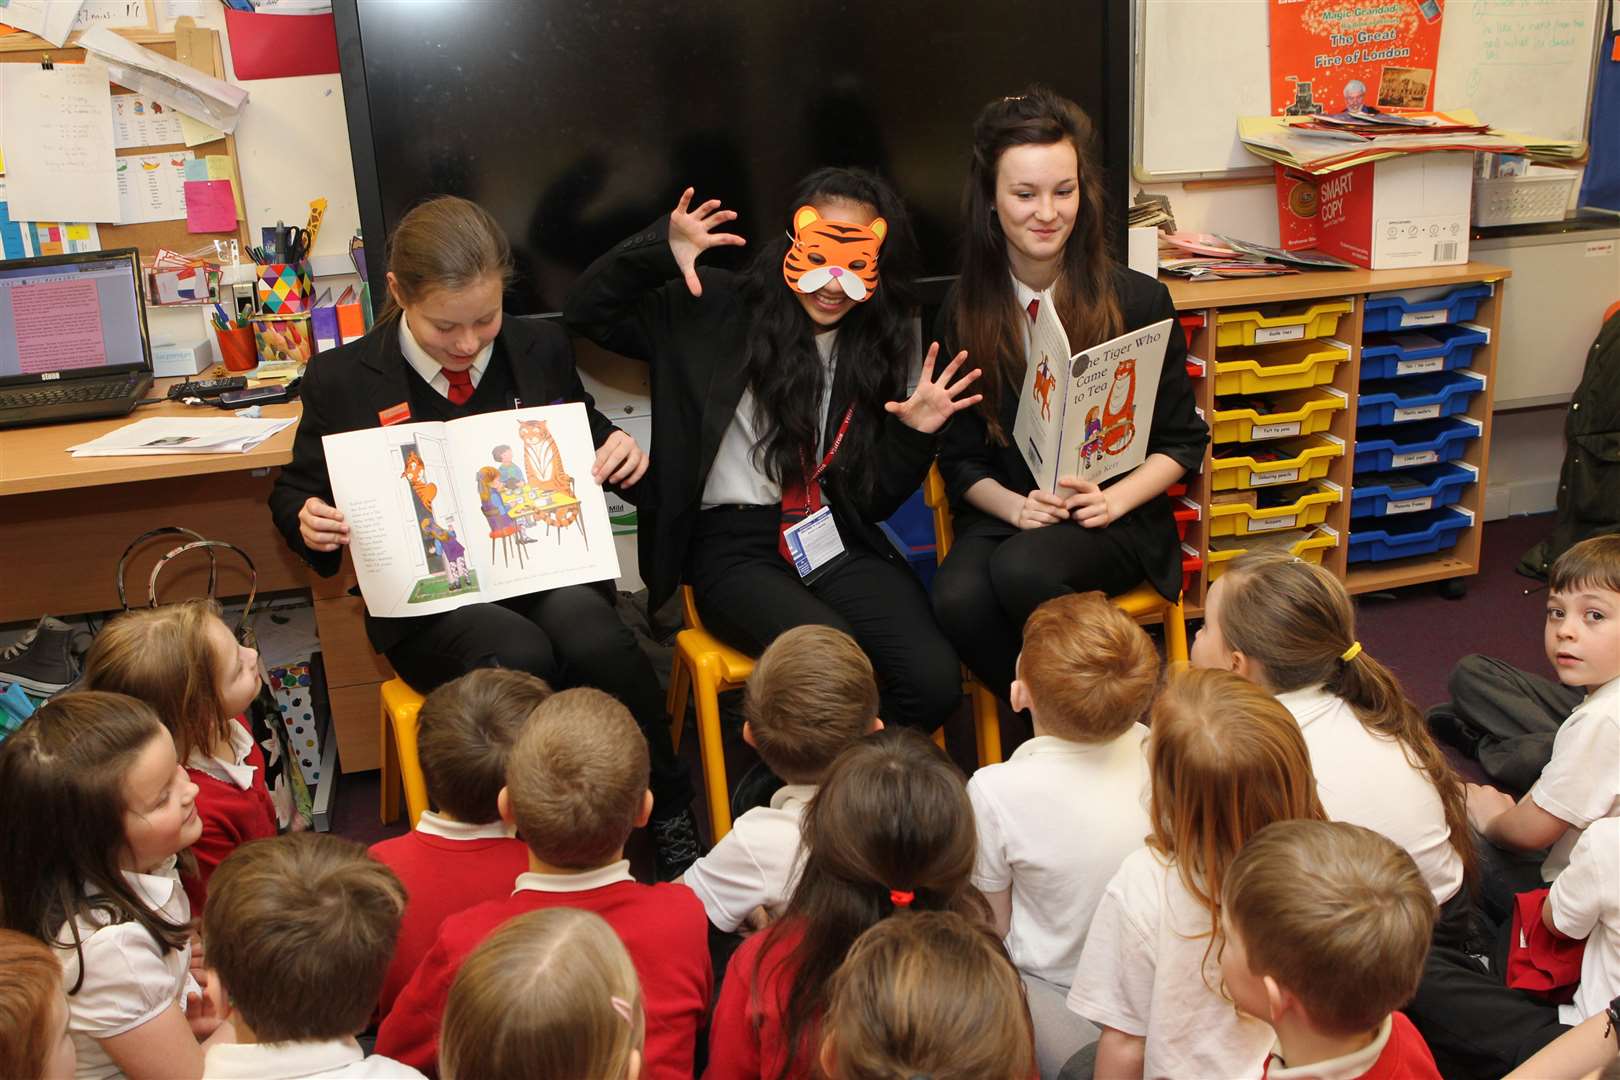 Erin Chappell, 13, Zhanelle Morgan and Megan Poultney, both 14 read and act out the Tiger Who Came to Tea story in front of a Year two class at Queenborough Primary School